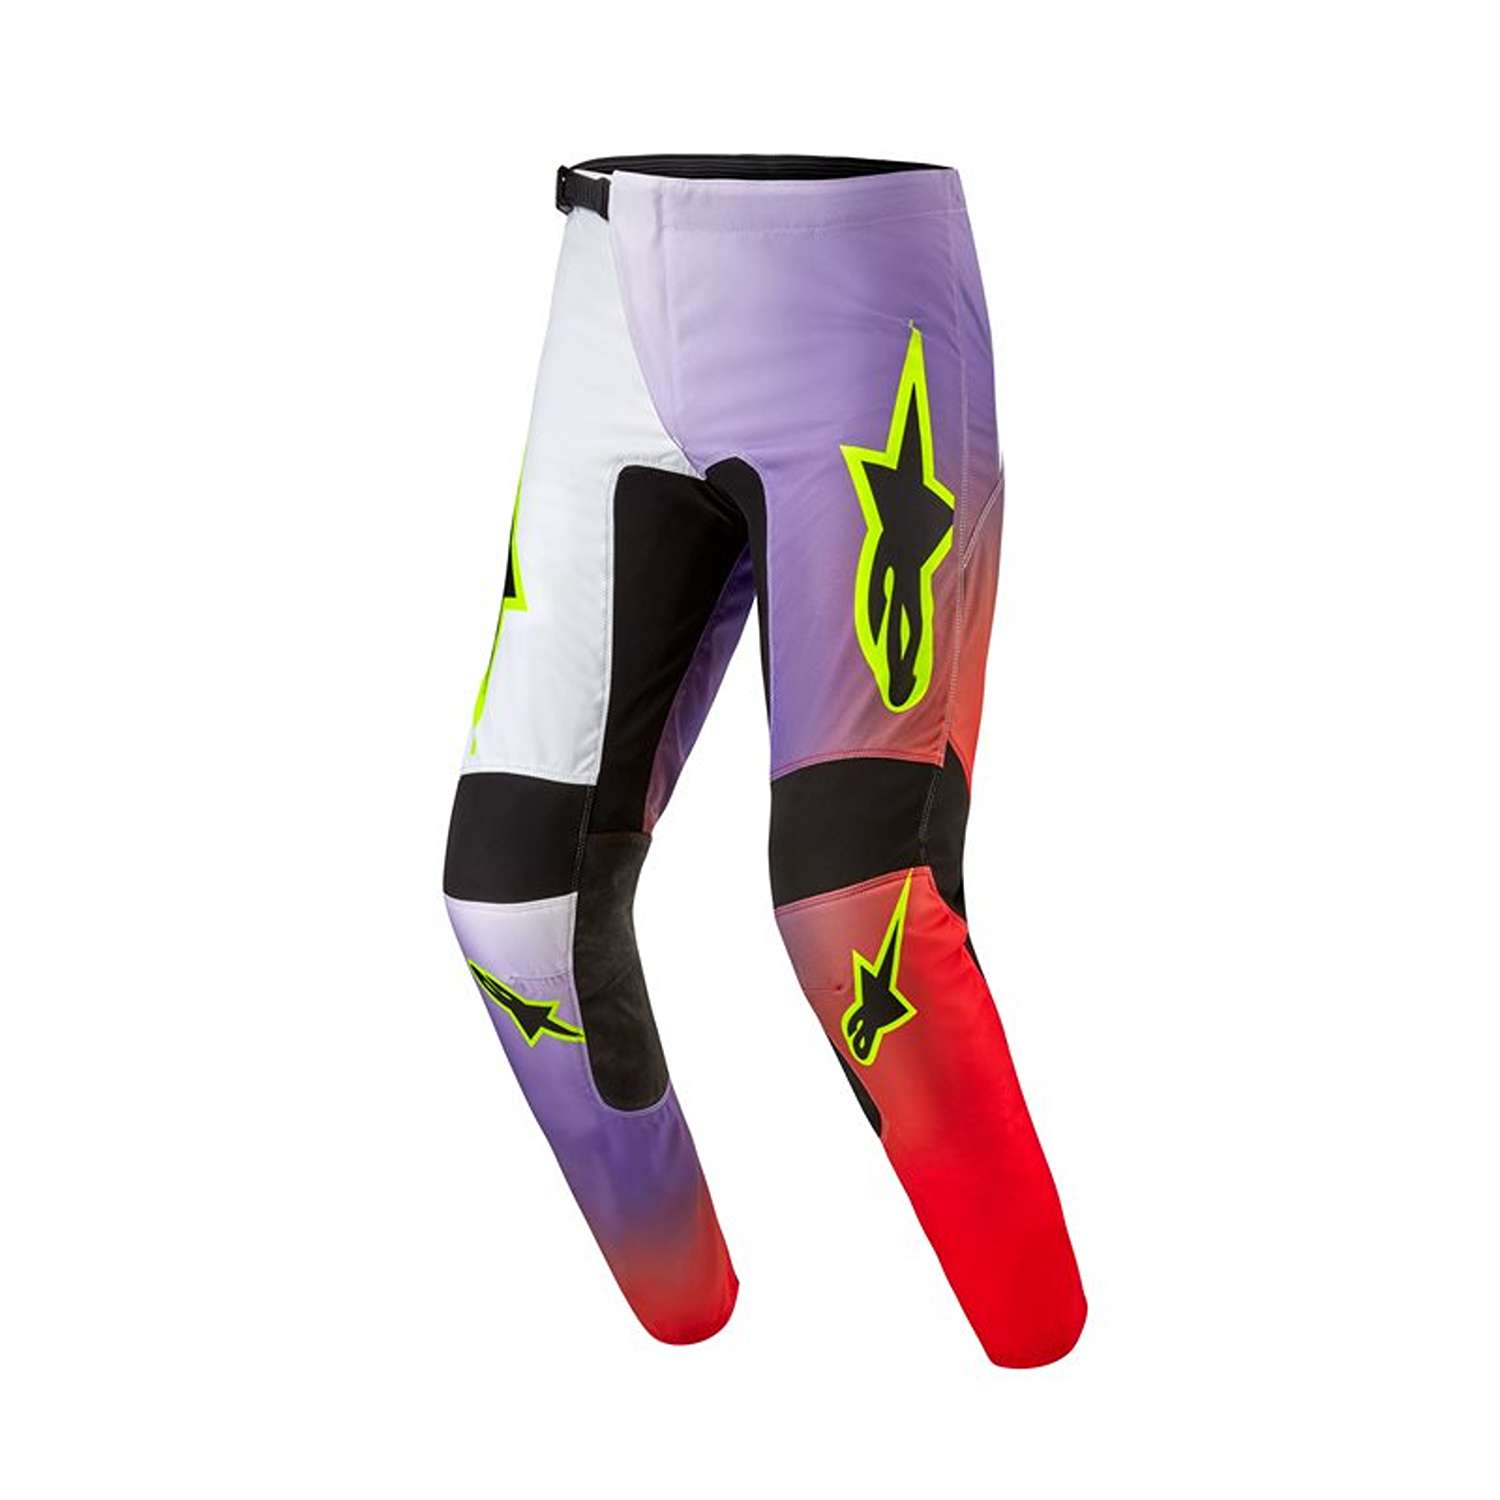 Image of Alpinestars Fluid Lucent Pants White Neon Red Yellow Fluo Size 40 ID 8059347266121